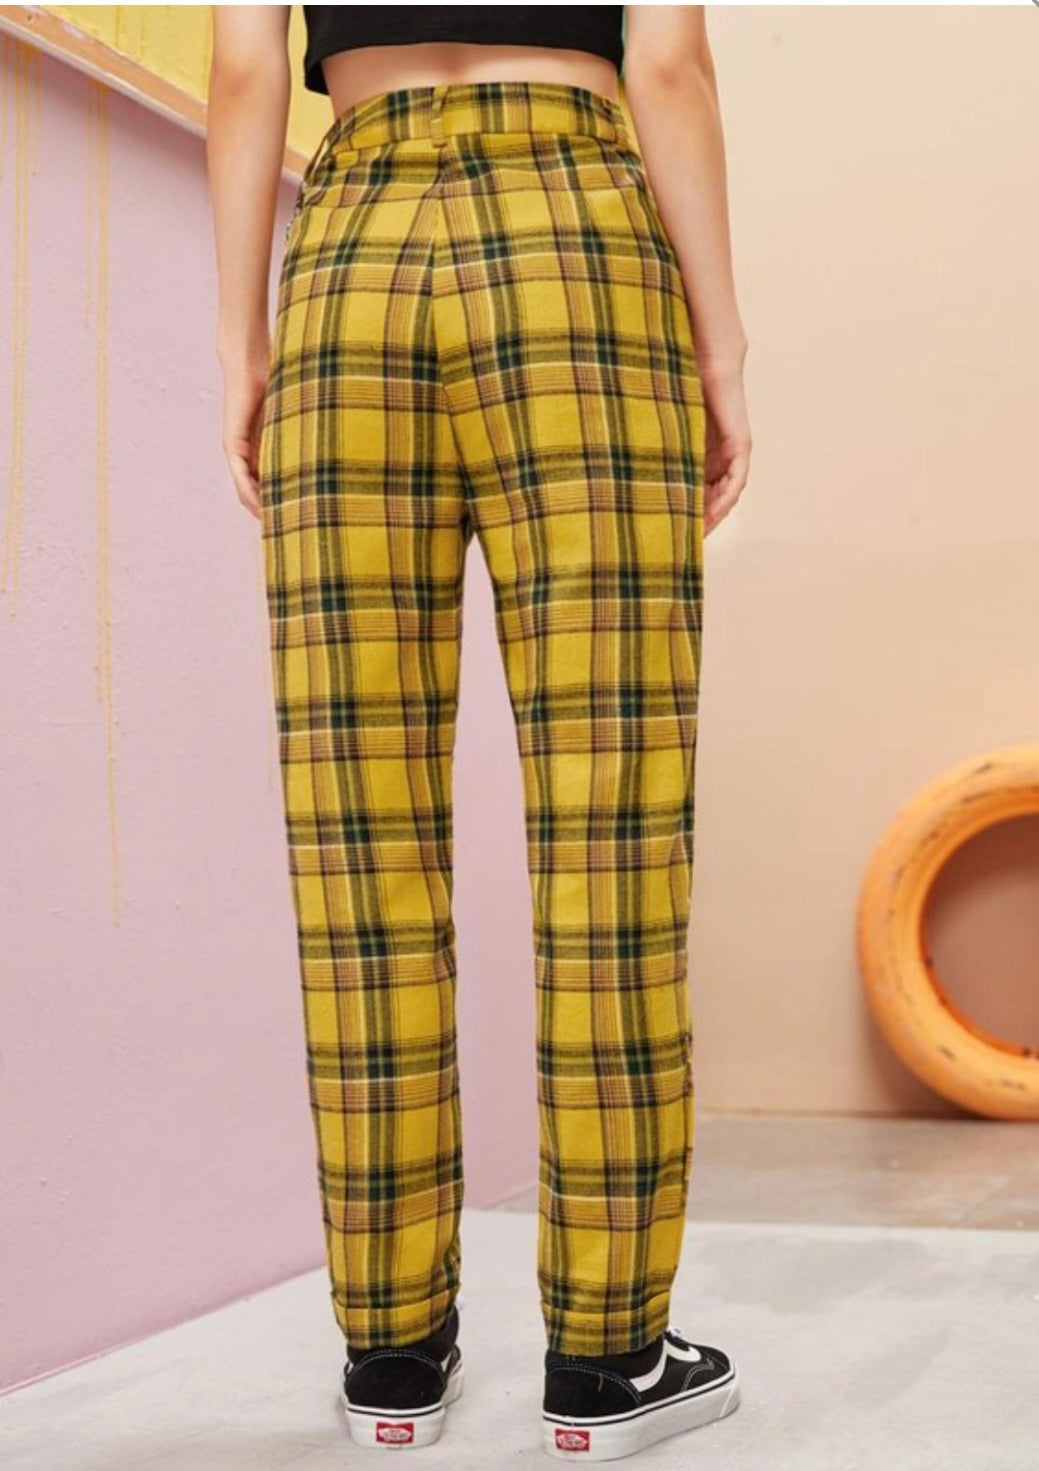 Men's Chinos Trousers Jogger Pants Plaid Dress Pants Pocket Breathable Soft  Casual Daily Fashion Streetwear Blue Yellow Micro-elastic / Spring | Plaid  dress pants, Type of pants, Streetwear fashion